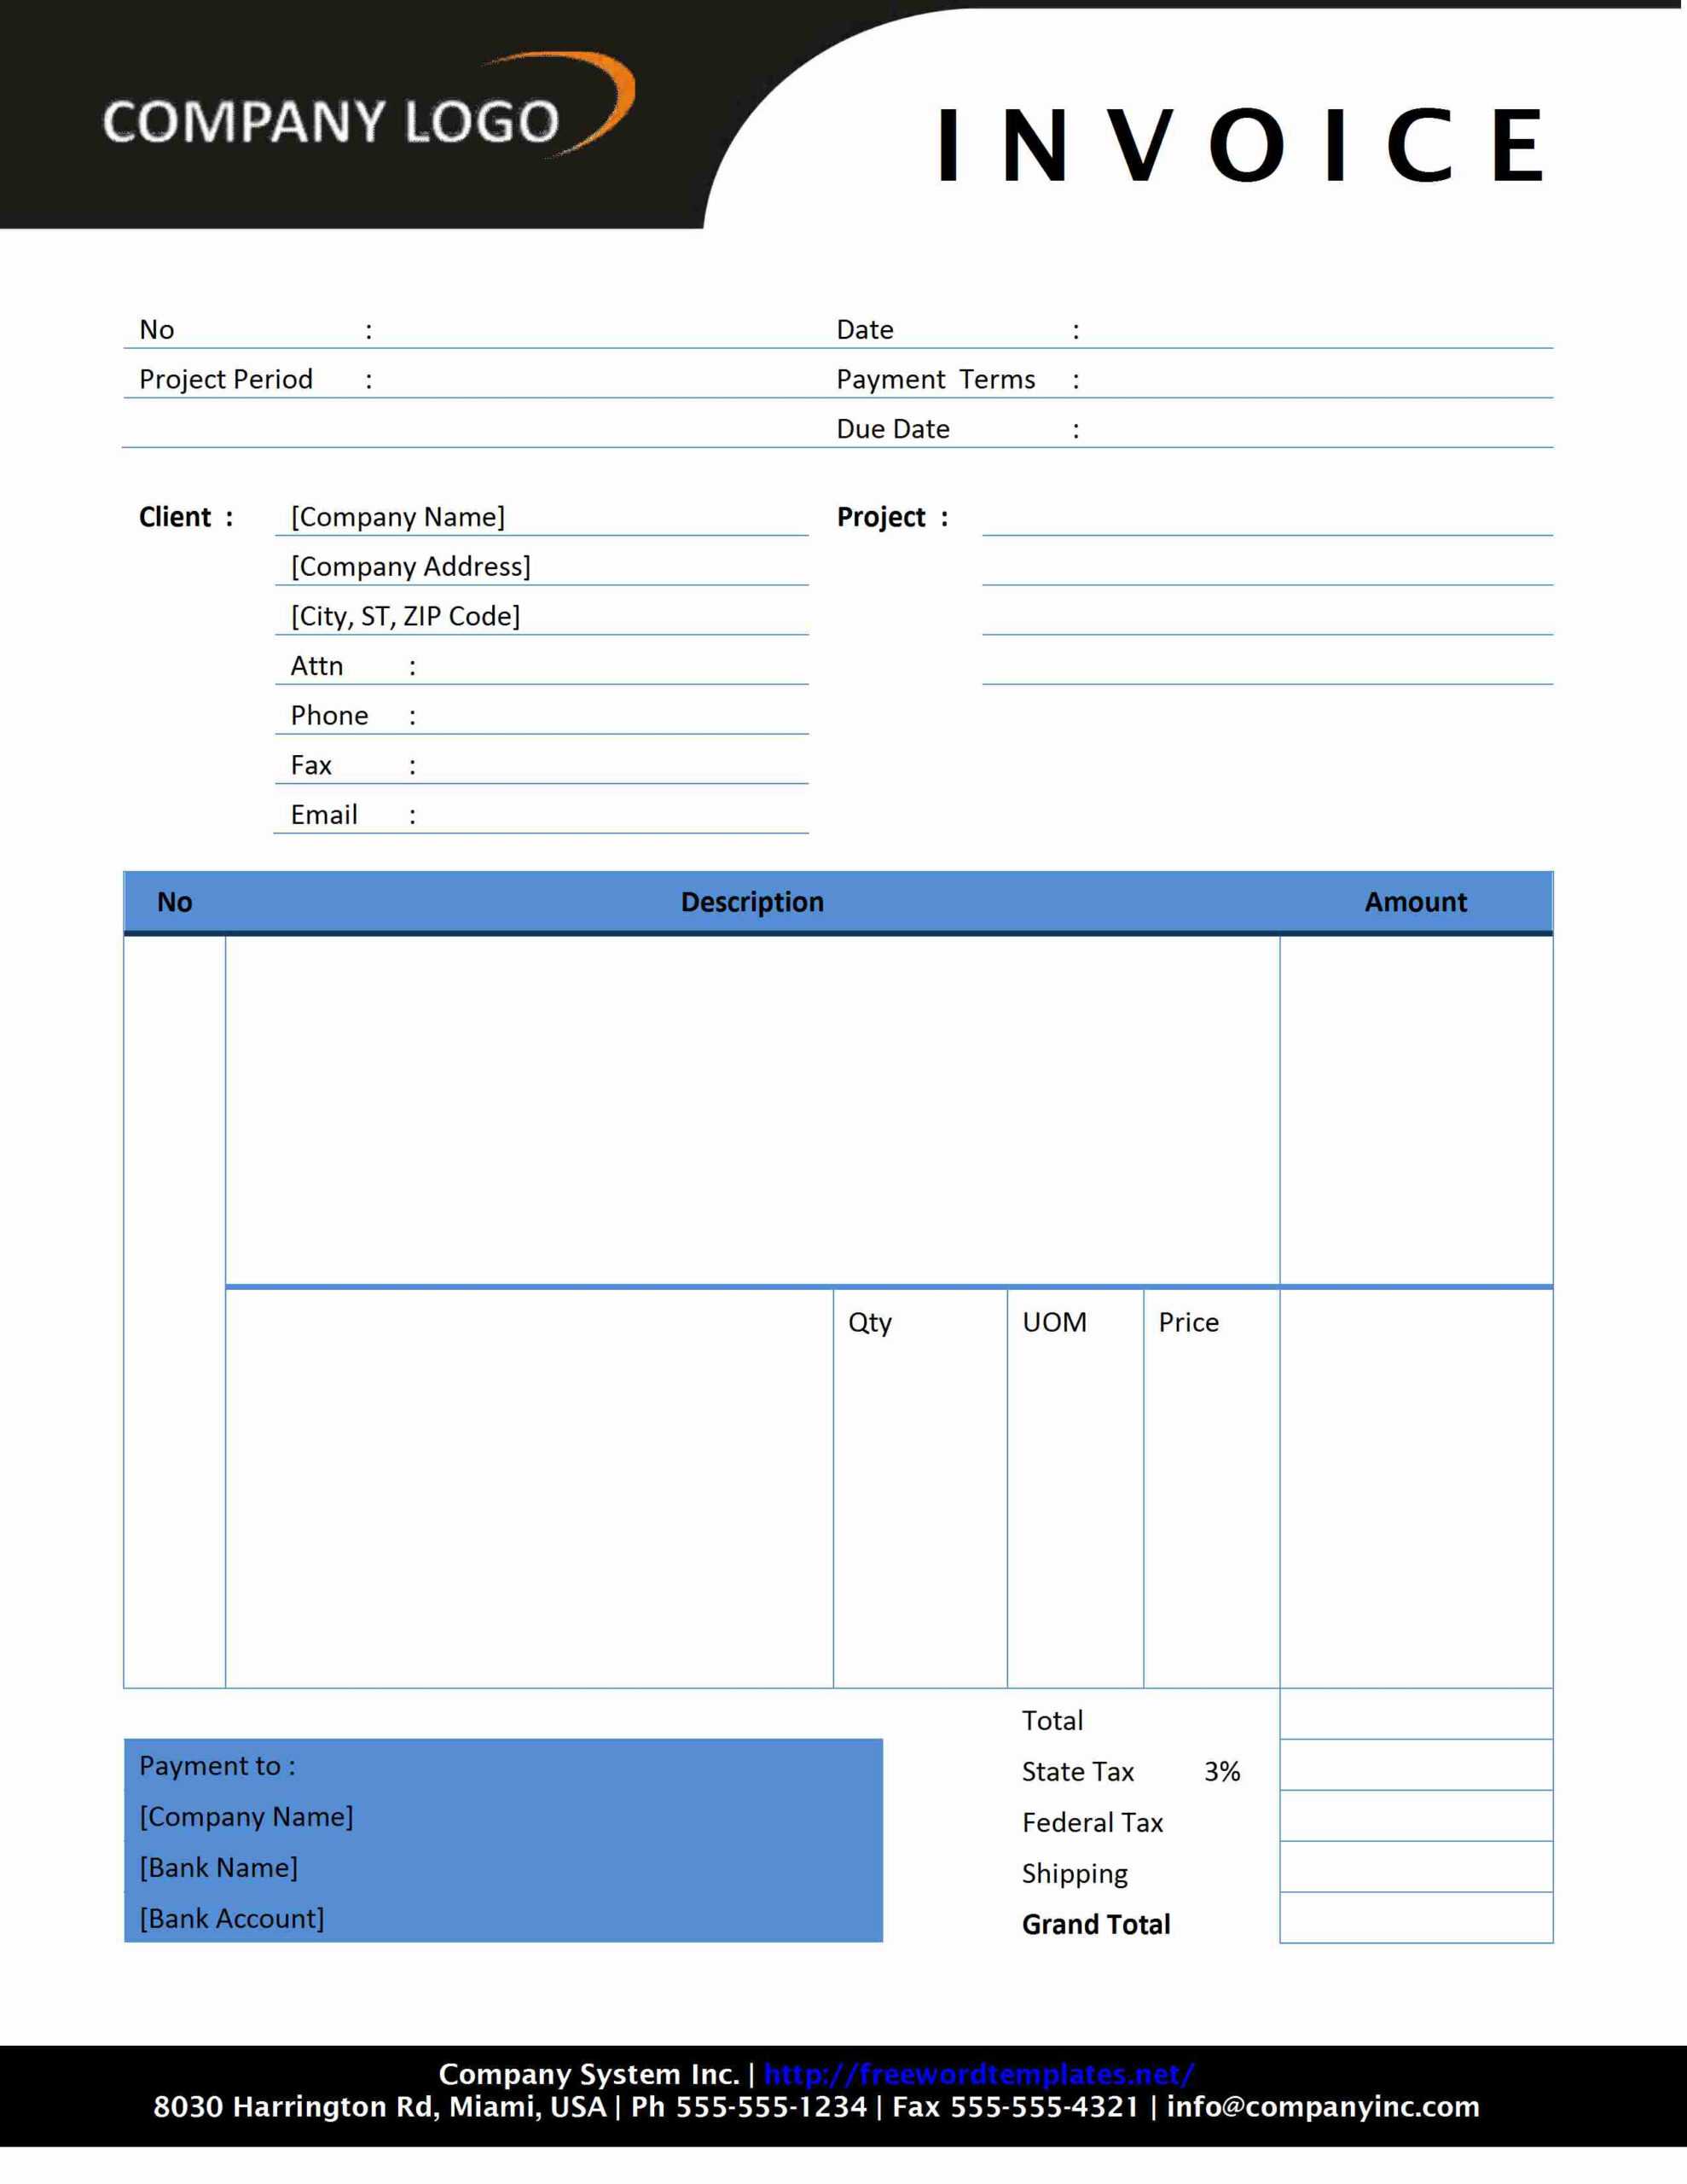 Invoice Template Word Mac | Invoice Example With Free Invoice Template Word Mac